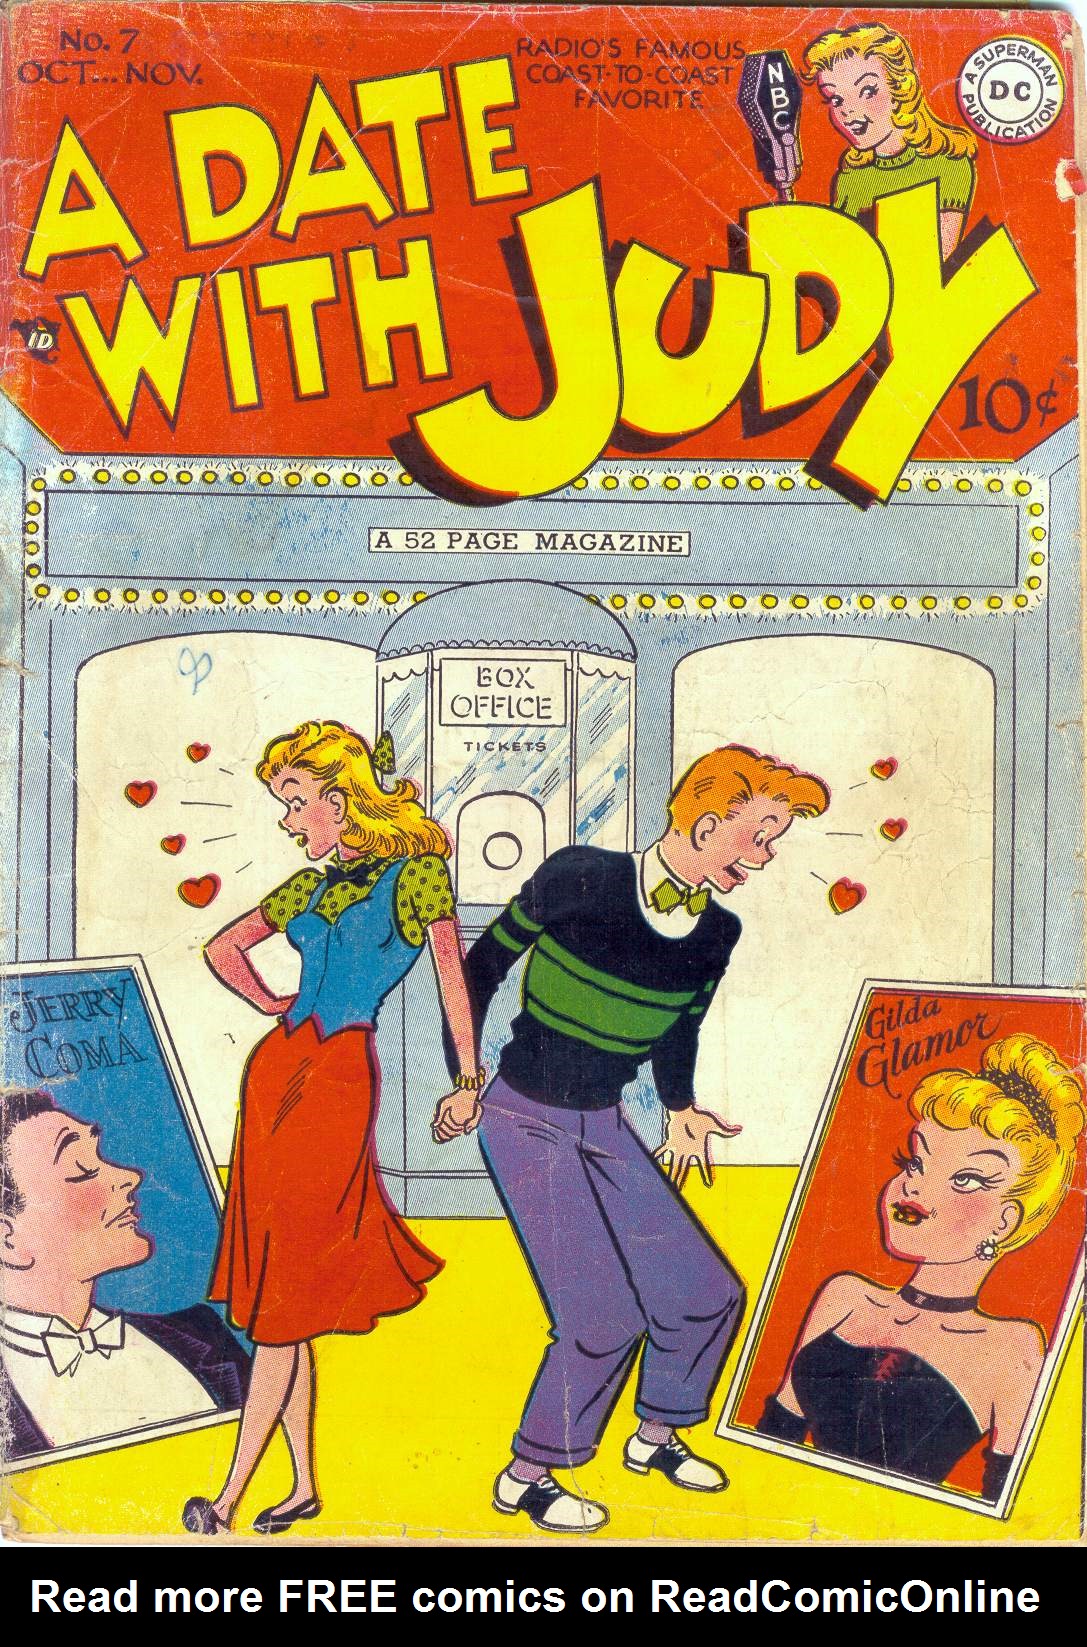 Read online A Date with Judy comic -  Issue #7 - 1